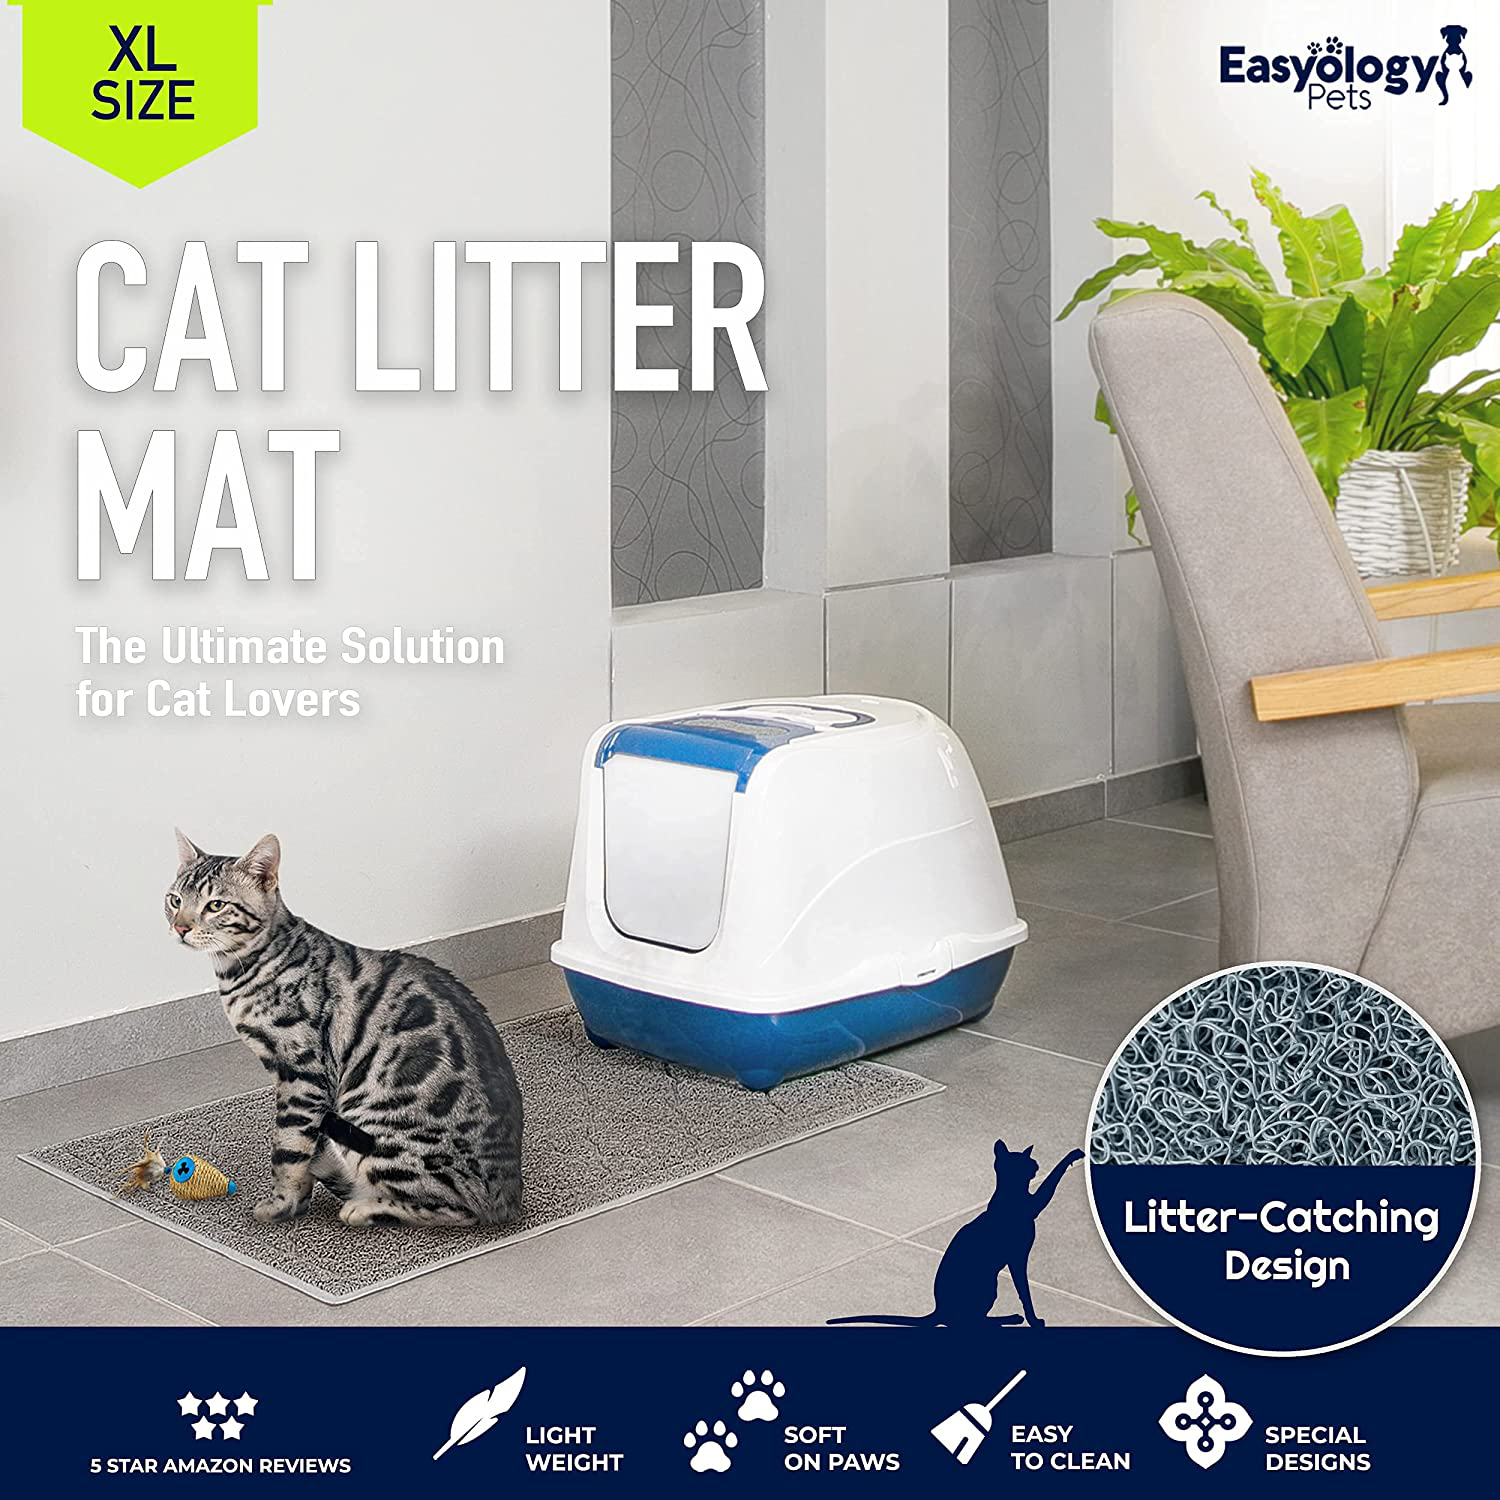 Premium Large Cat Litter Mat 35" X 23", Traps Messes, Easy Clean, Durable, Litter Box Mat with Scatter Control - Soft on Kitty Paws